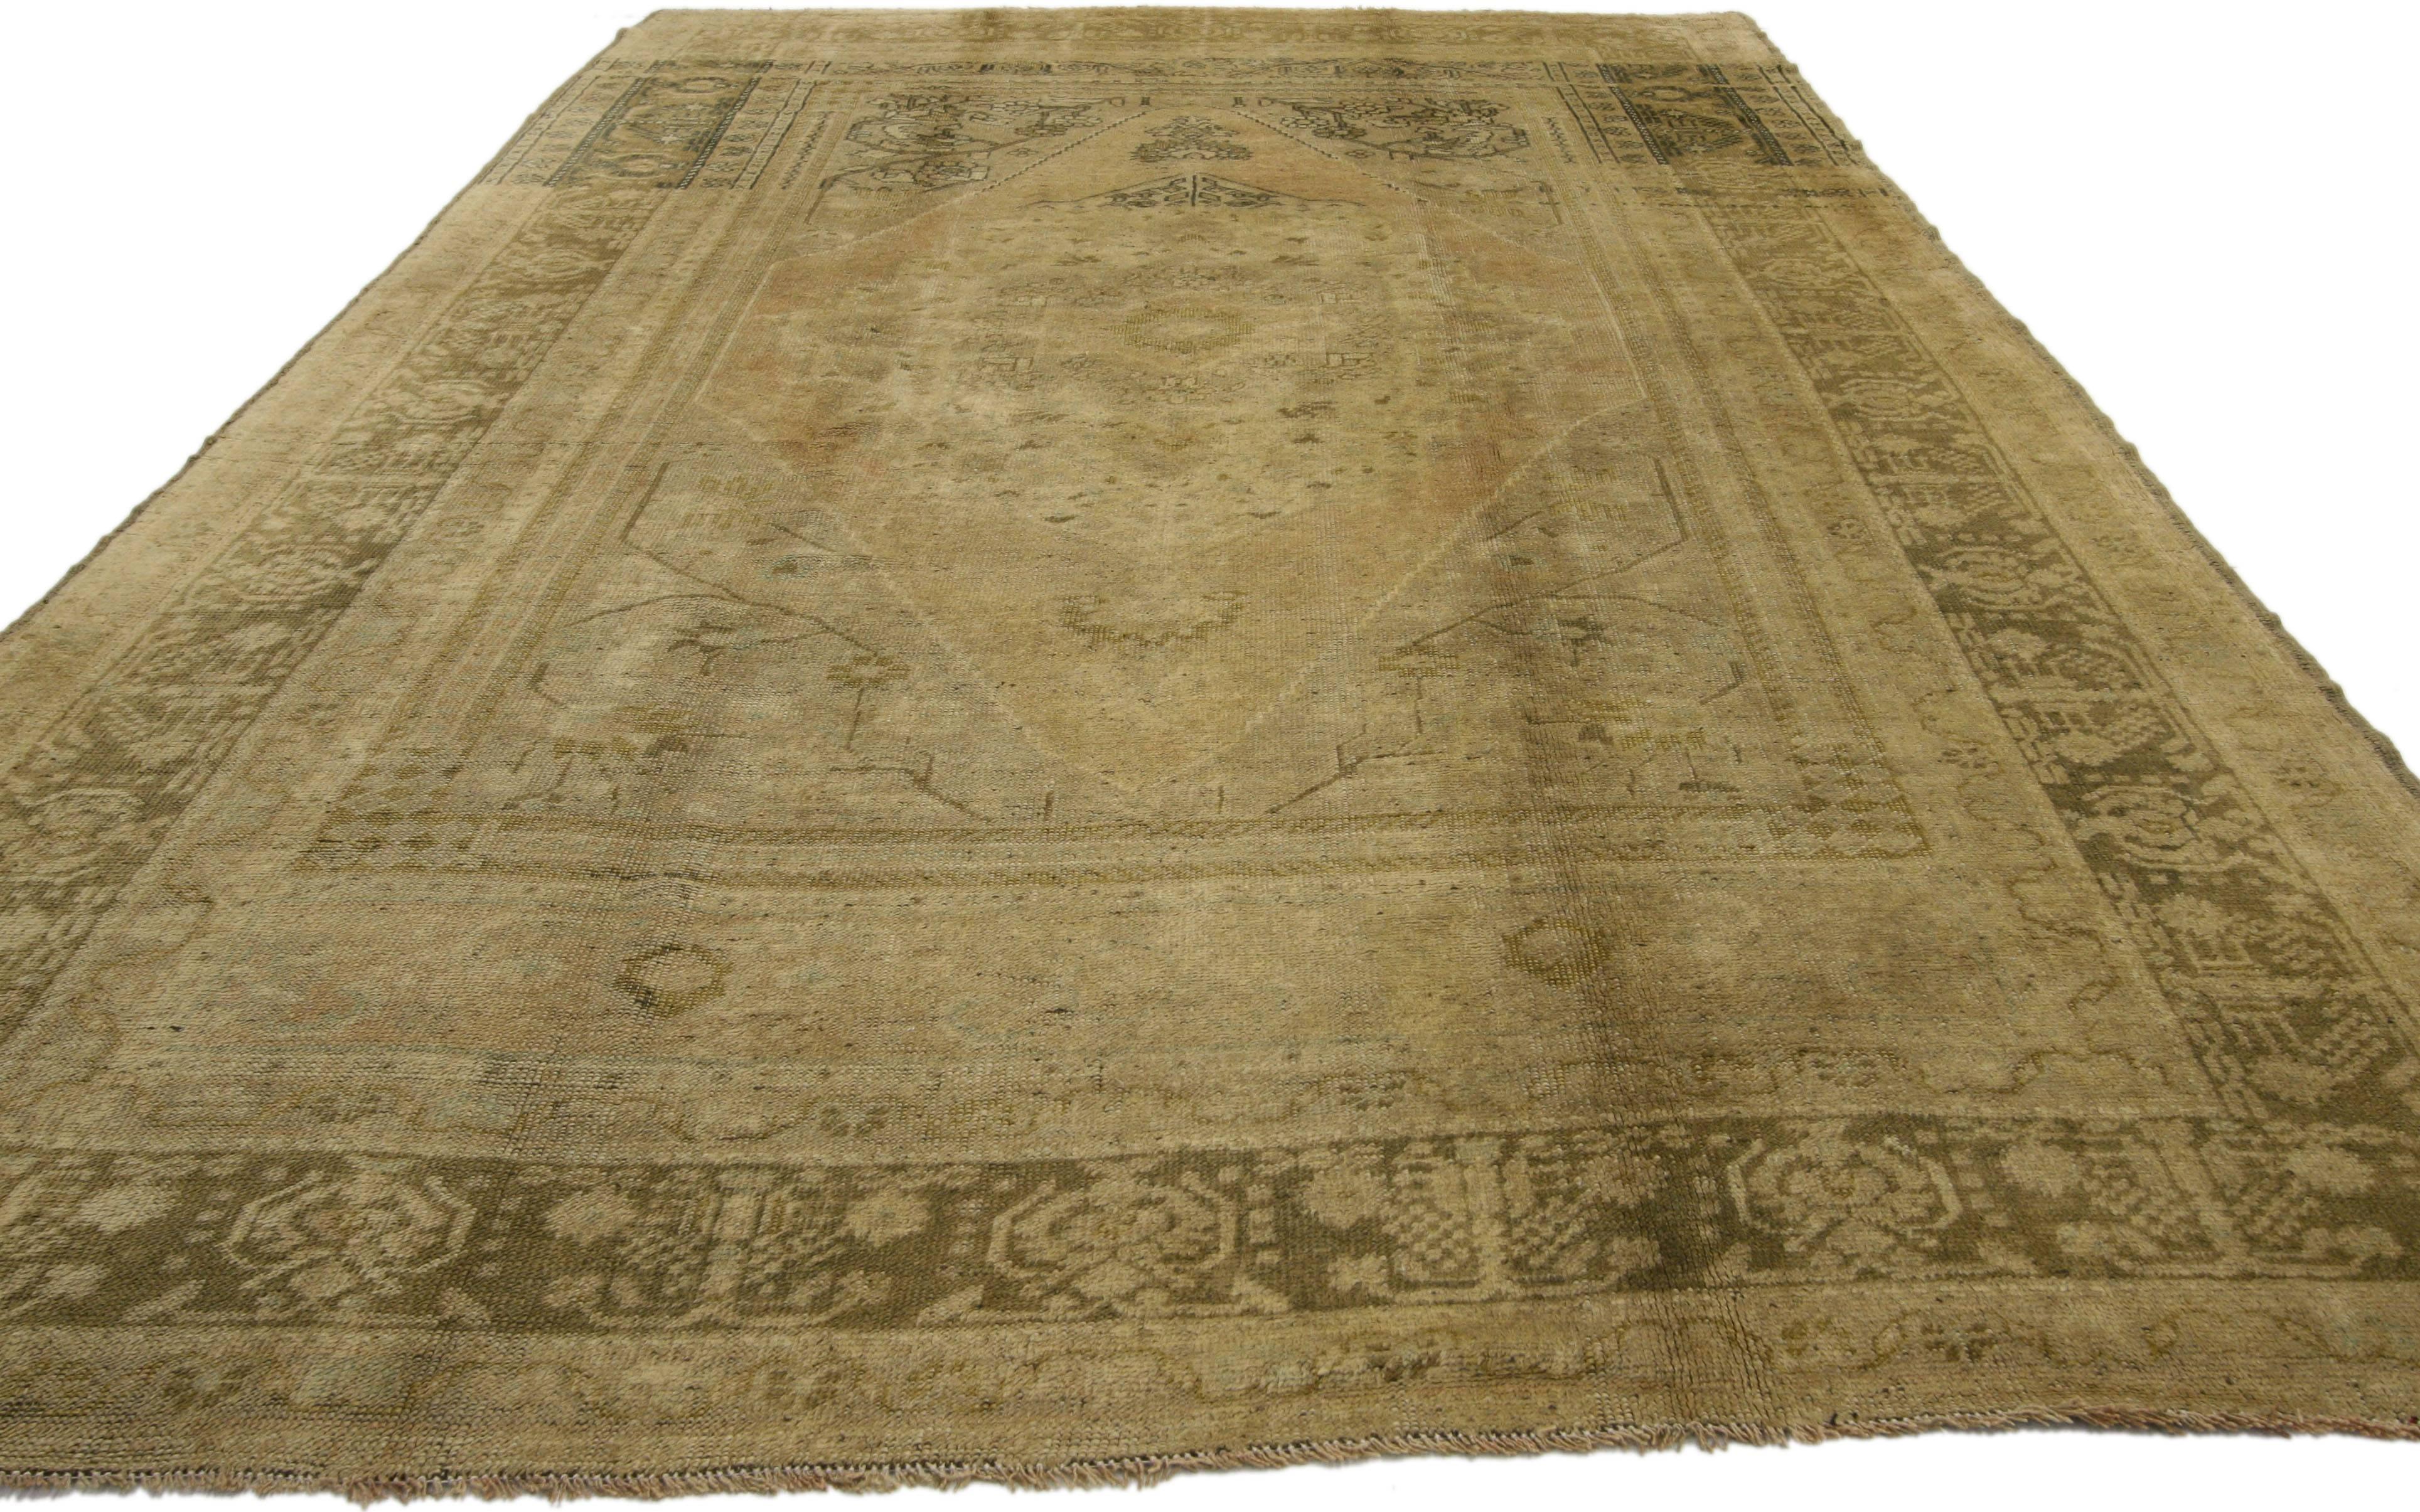 74094, vintage Turkish Oushak rug with traditional style. This hand-knotted wool vintage Turkish Oushak rug features a cusped central medallion in an abrashed field. It is framed with mihrab style quarter panels and enclosed with a complementary